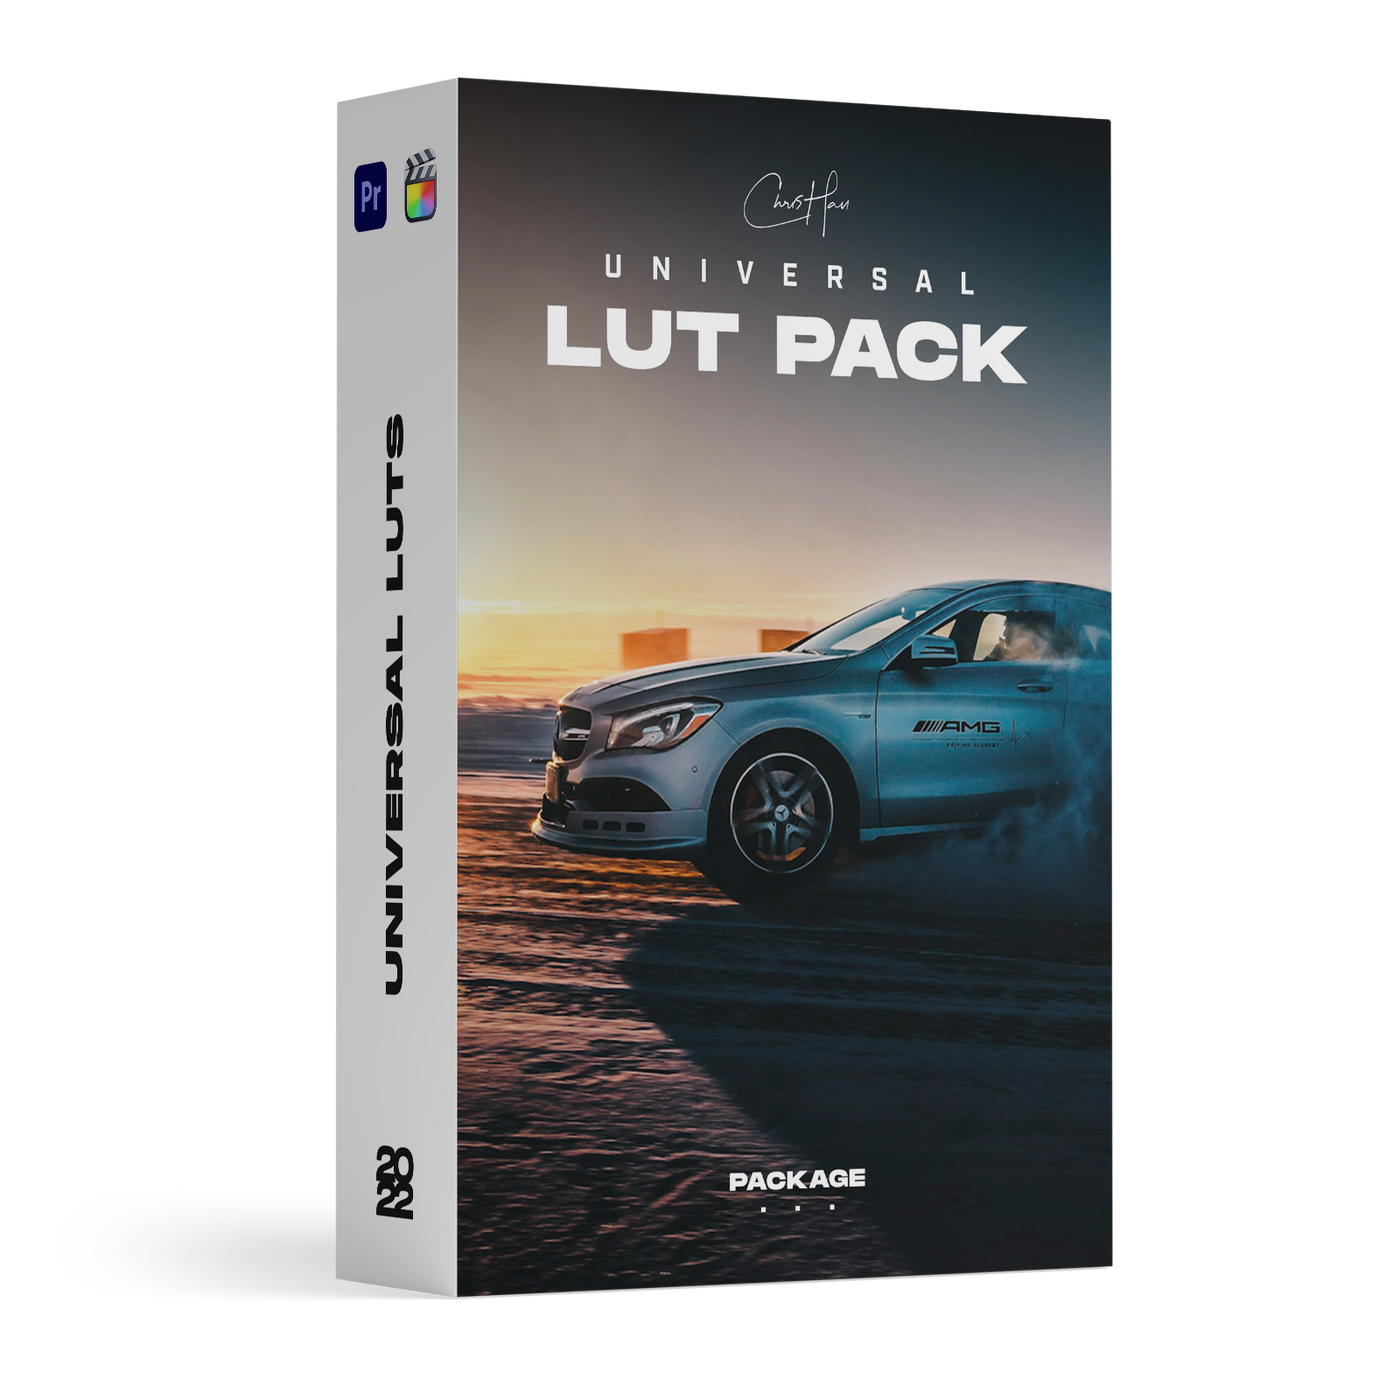 Universal Lut Pack